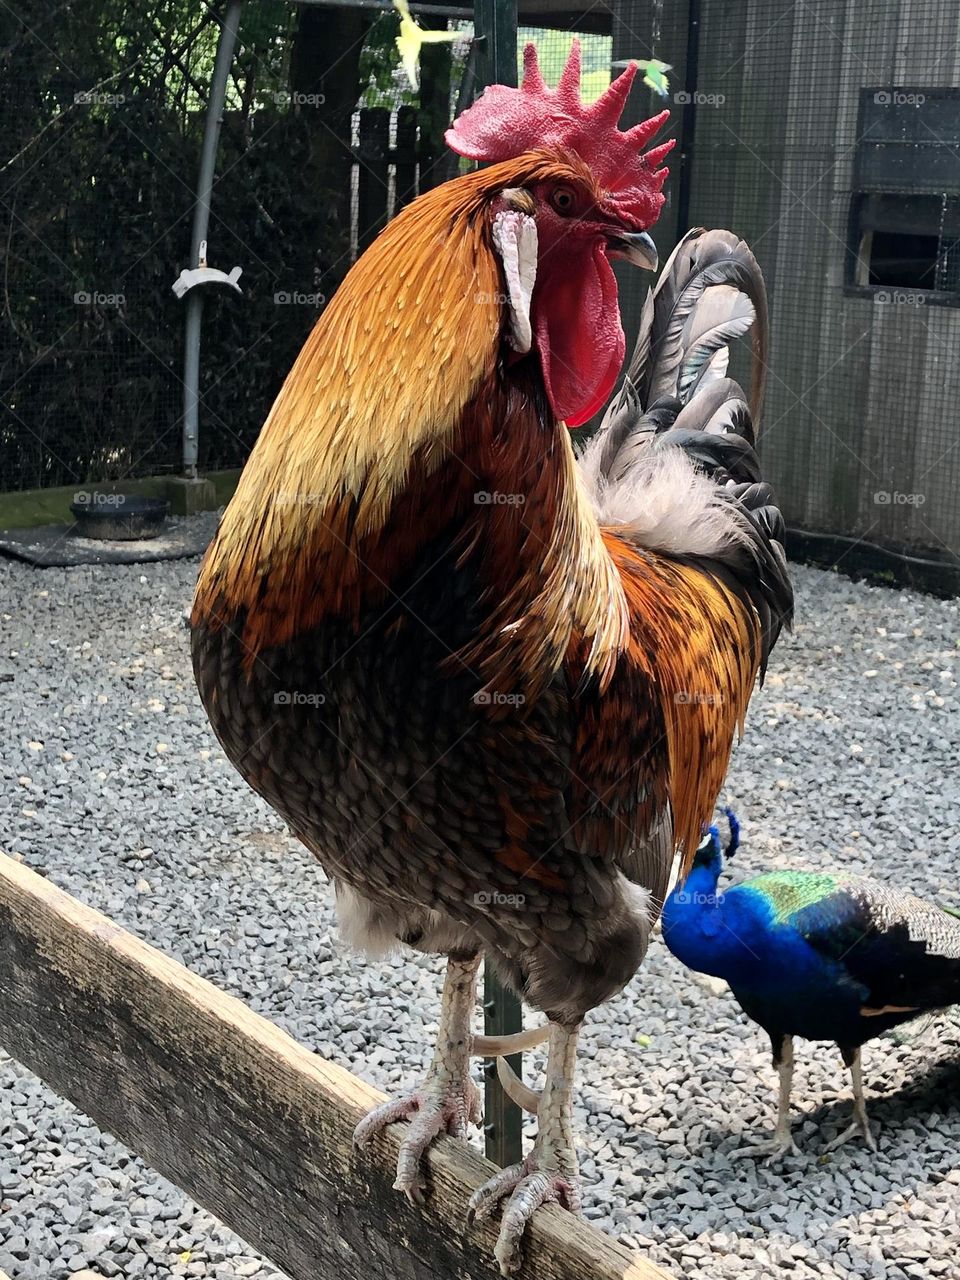 🐔 rooster and peacock 🦚  